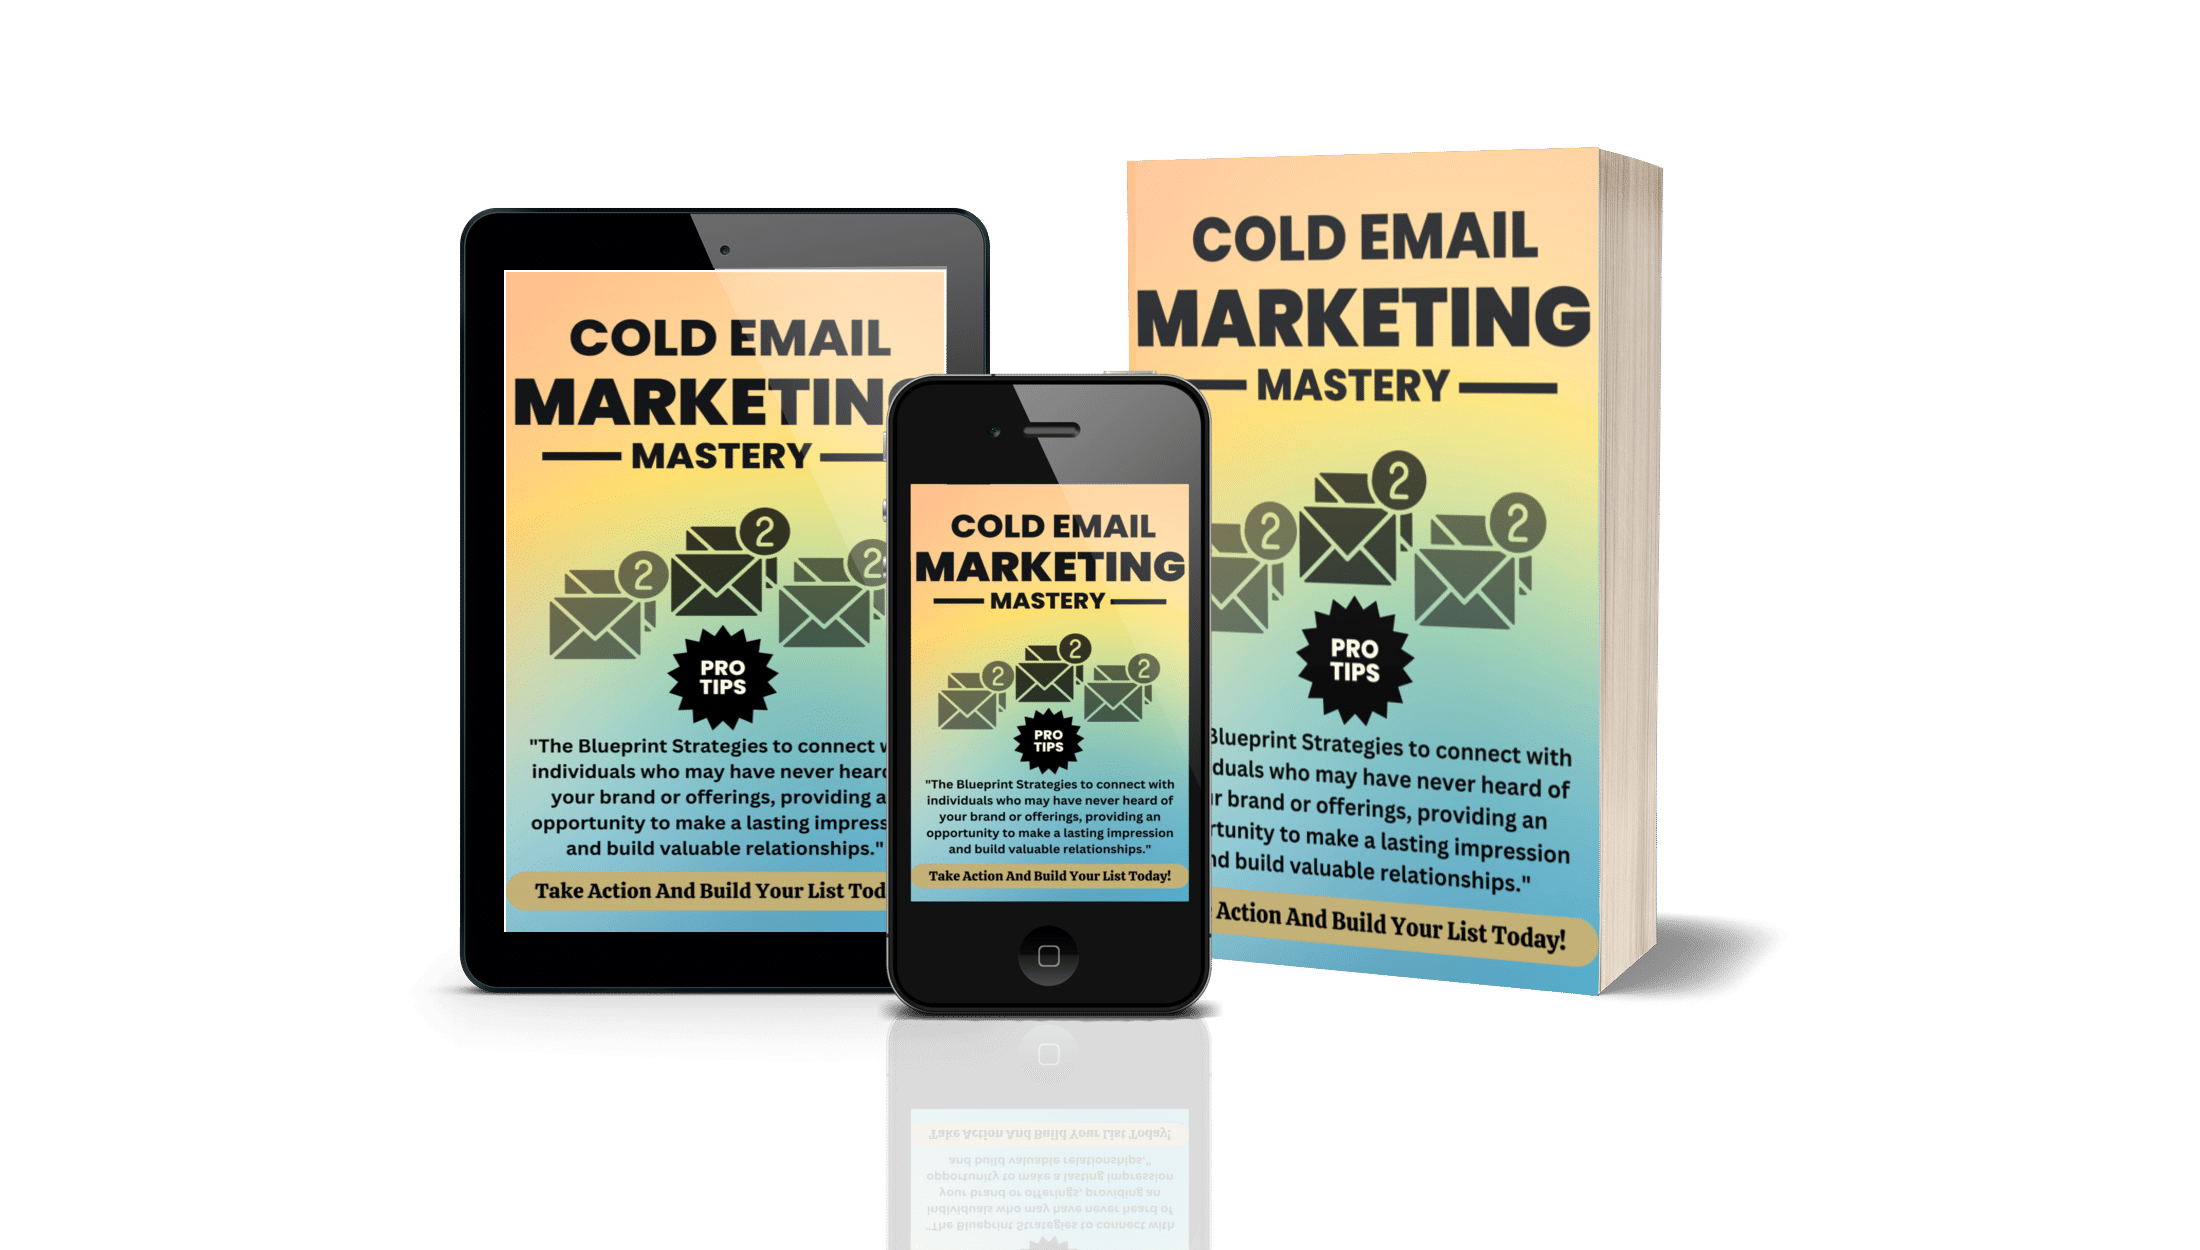 Cold Email Marketing Mastery Review